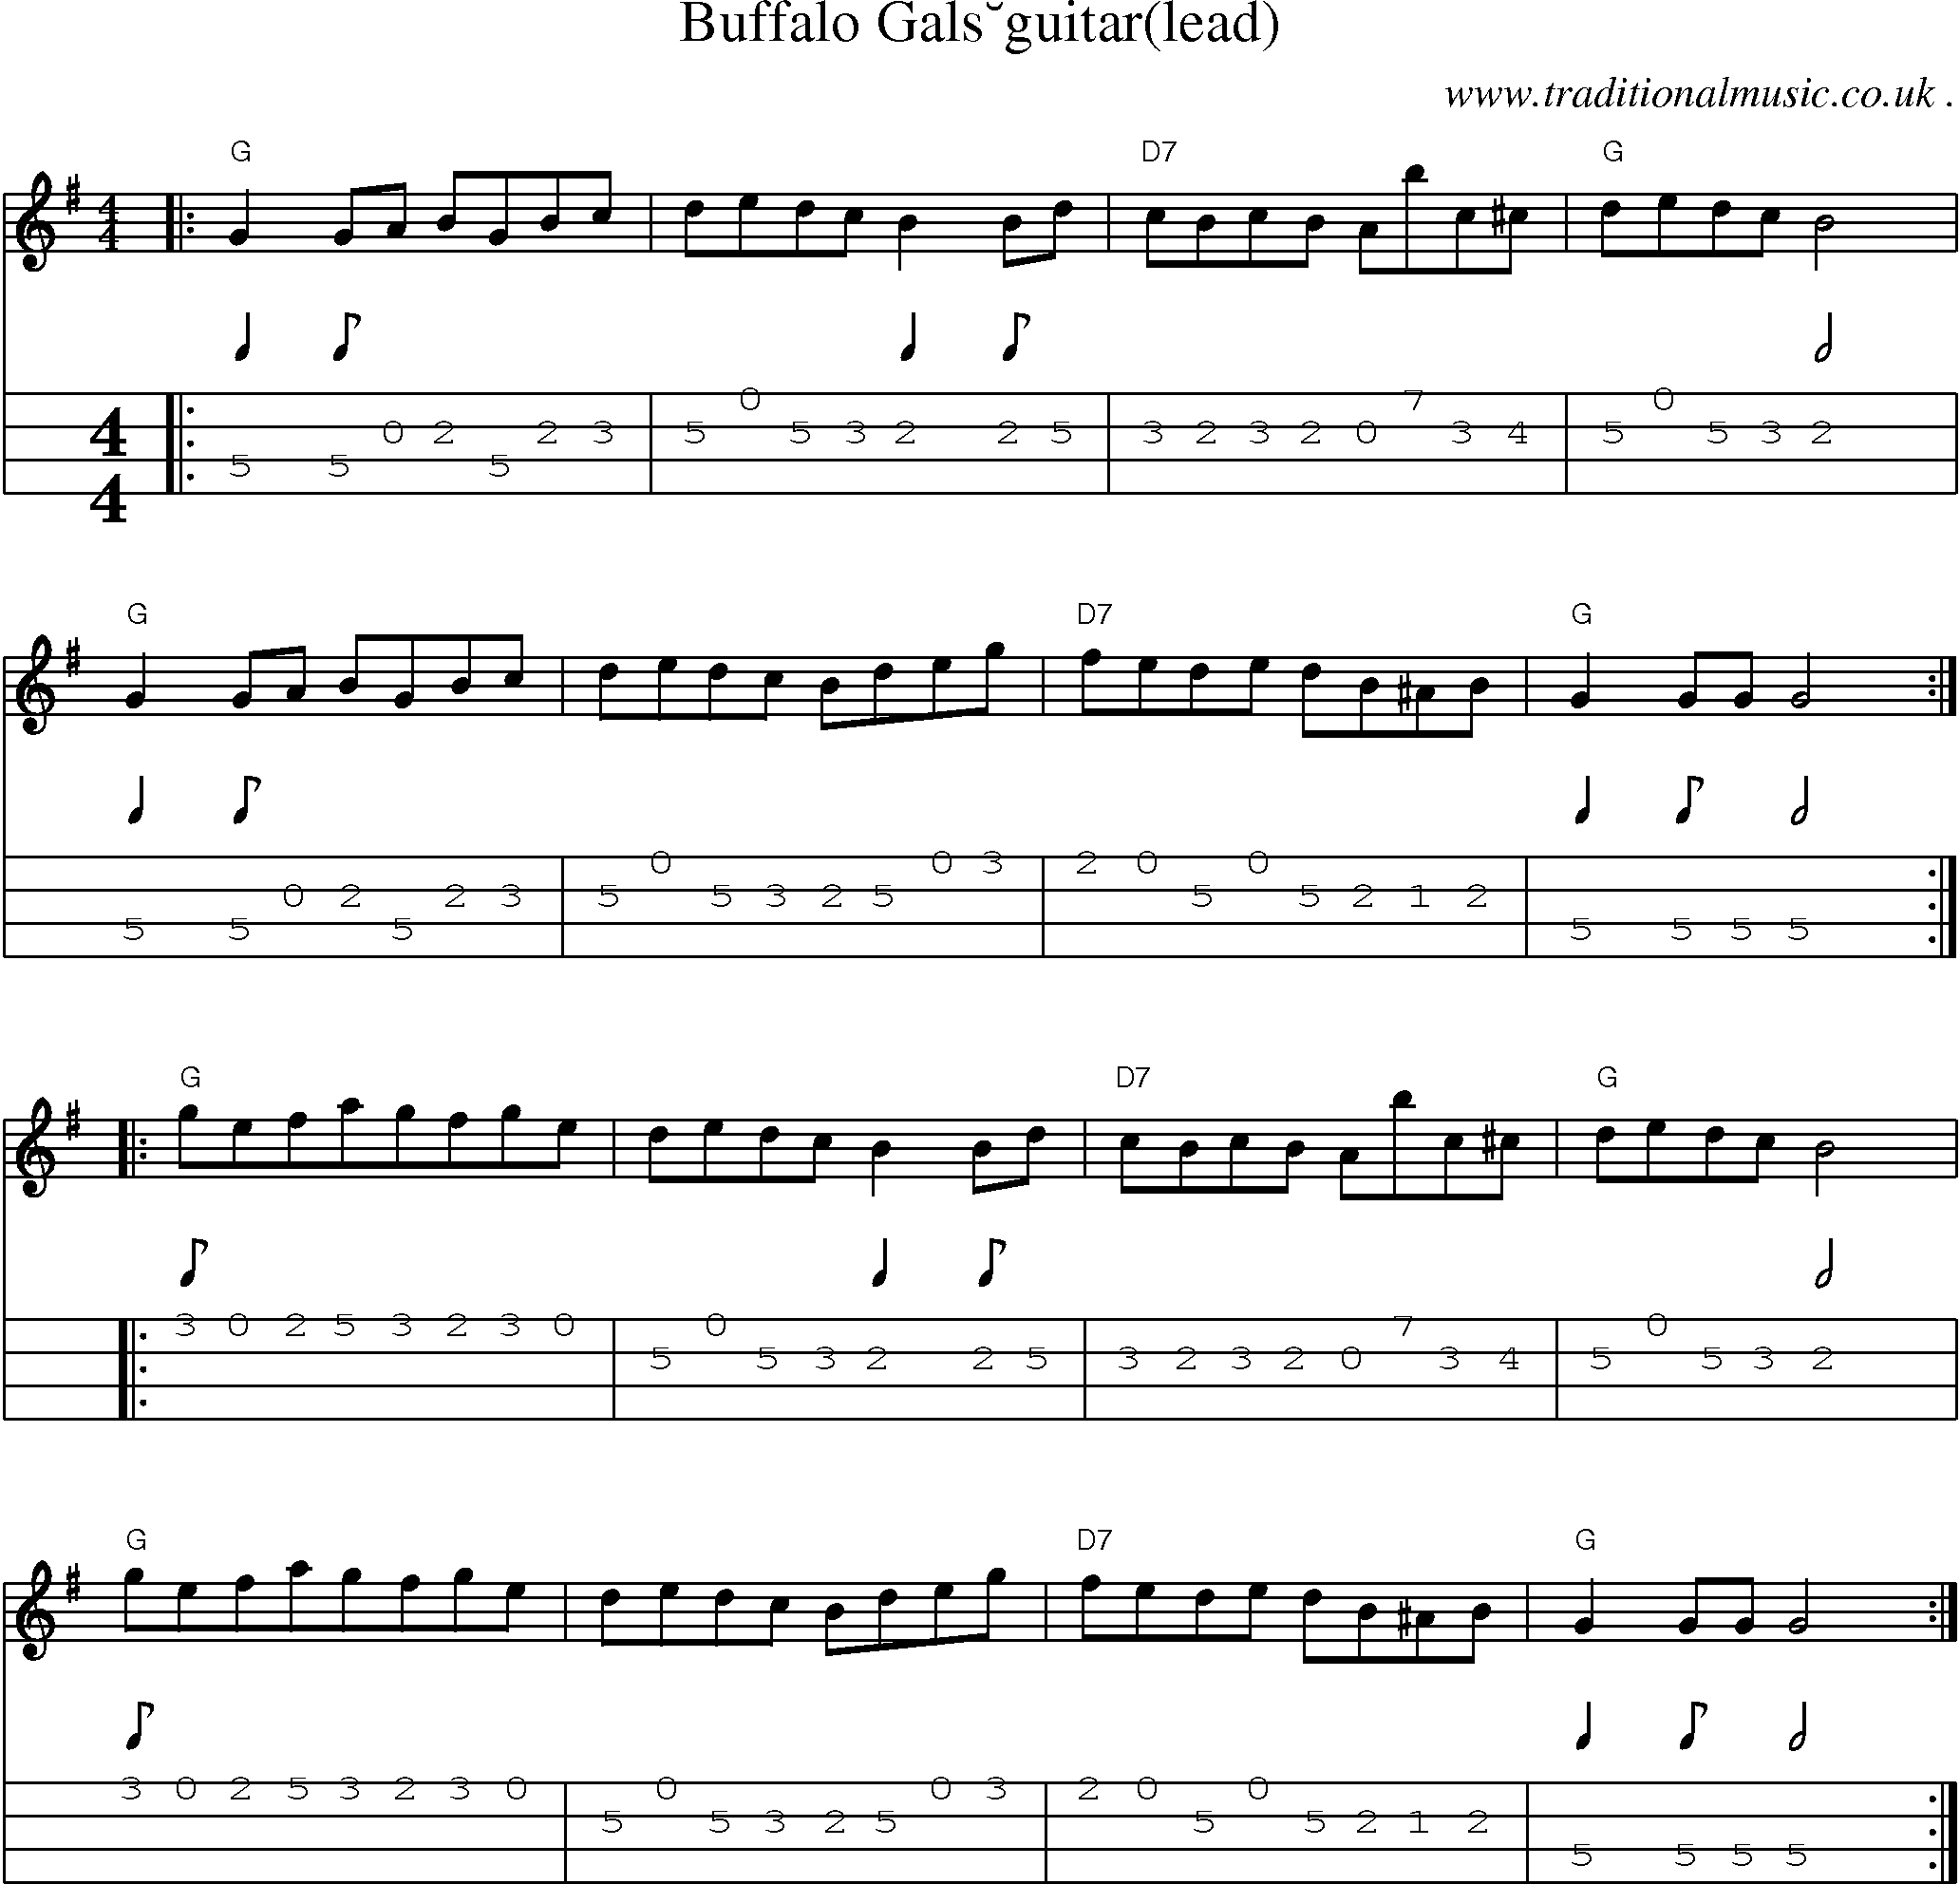 Music Score and Guitar Tabs for Buffalo Gals guitar ld